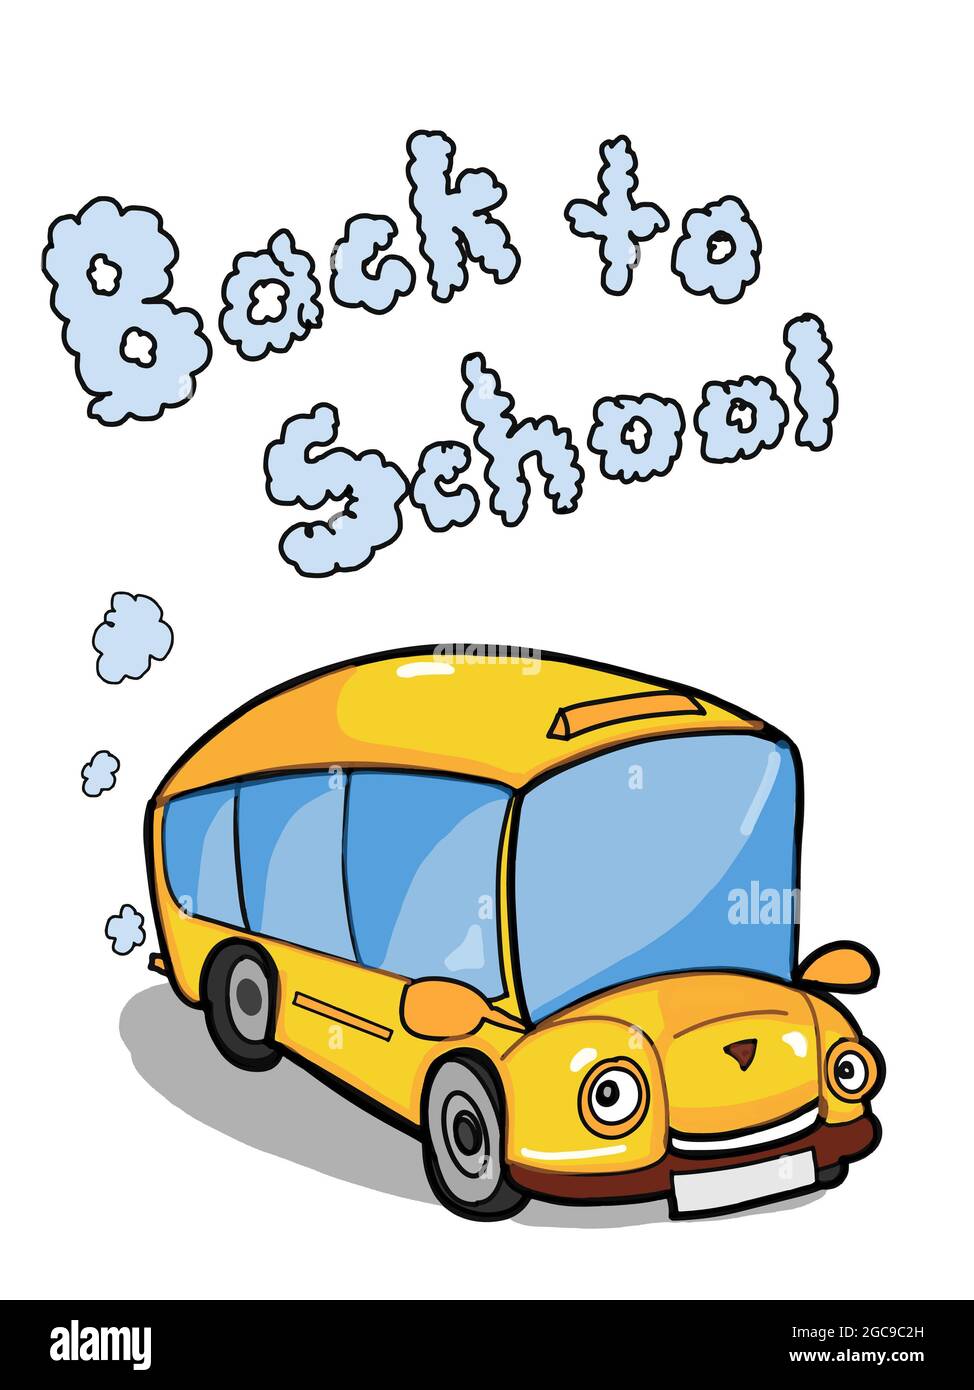 cartoon ,cute school bus, illustration and back to school text Stock Photo